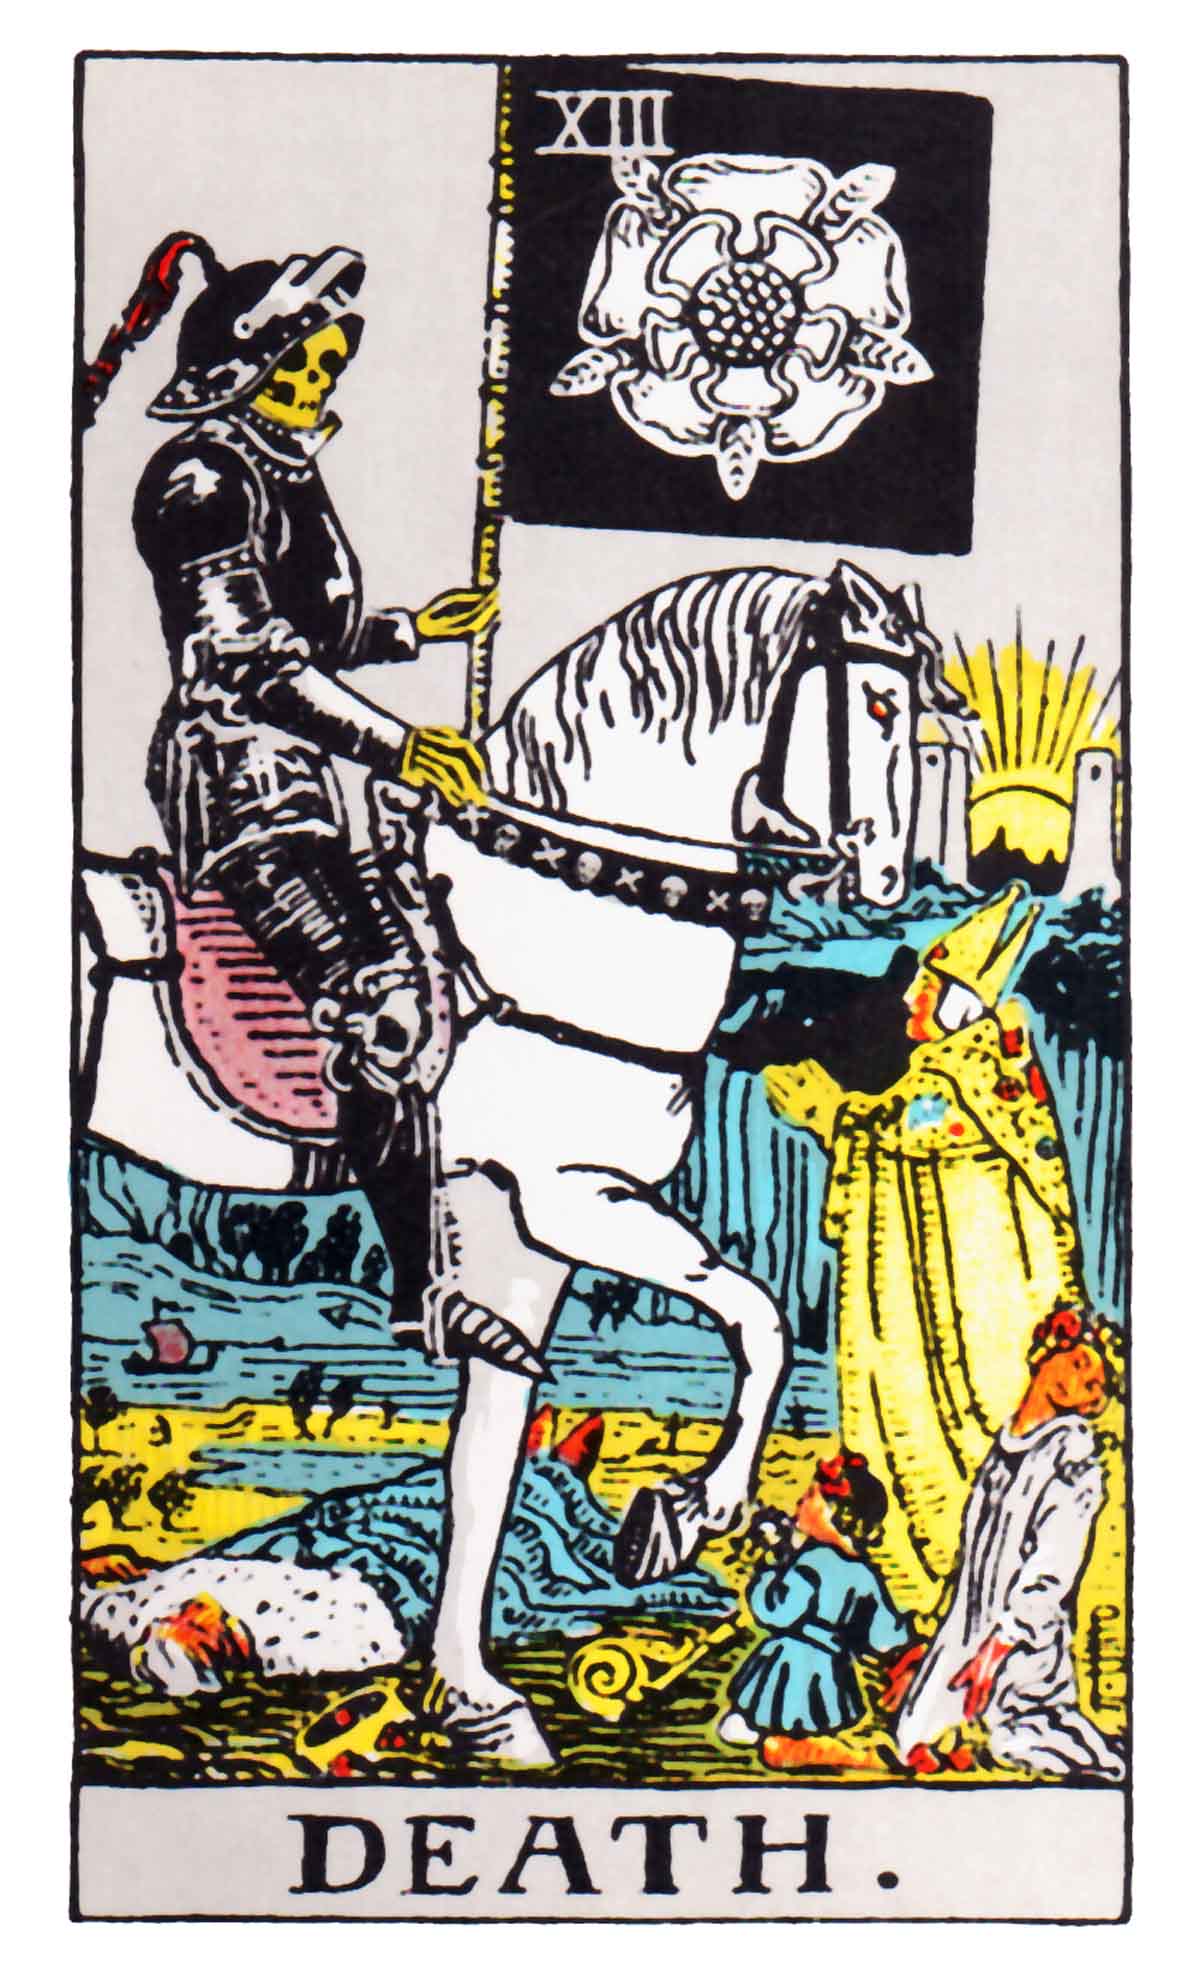 Kenneth Mitchell Died 13 Days After The Super Bowl, Which Is Symbolized By The Thirteenth Card In The Tarot Deck - The Death Card.